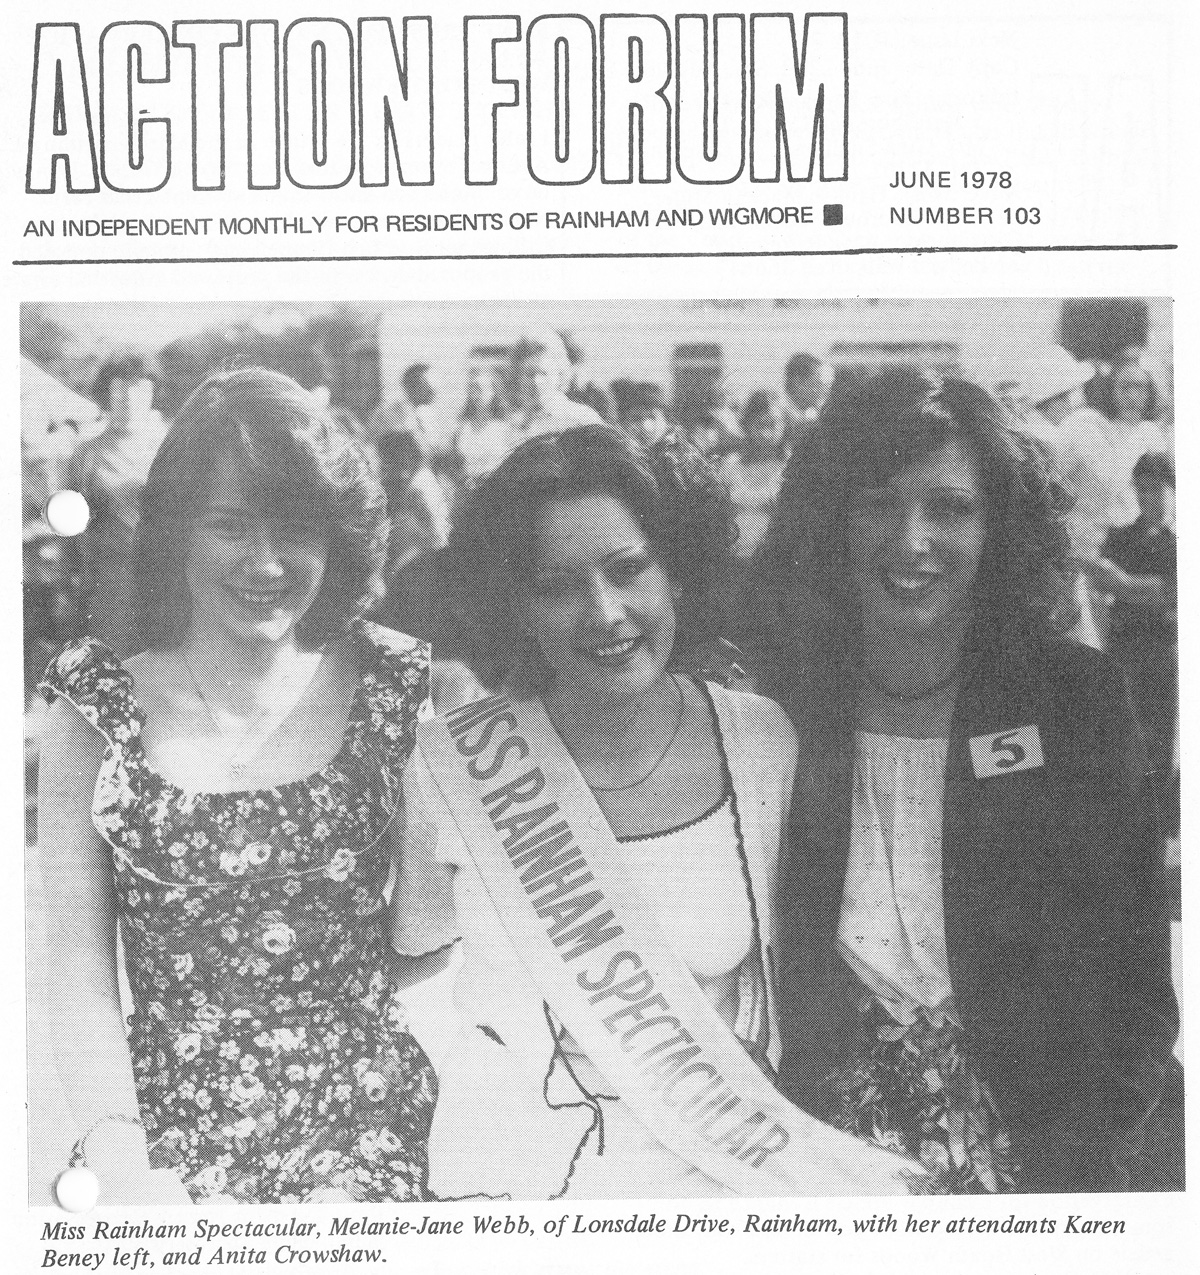 Action Forum from June 1978 showing a photo of Miss Rainham Melanie-Jane Webb along with attendants Karen Beney and Anita Crowshaw.